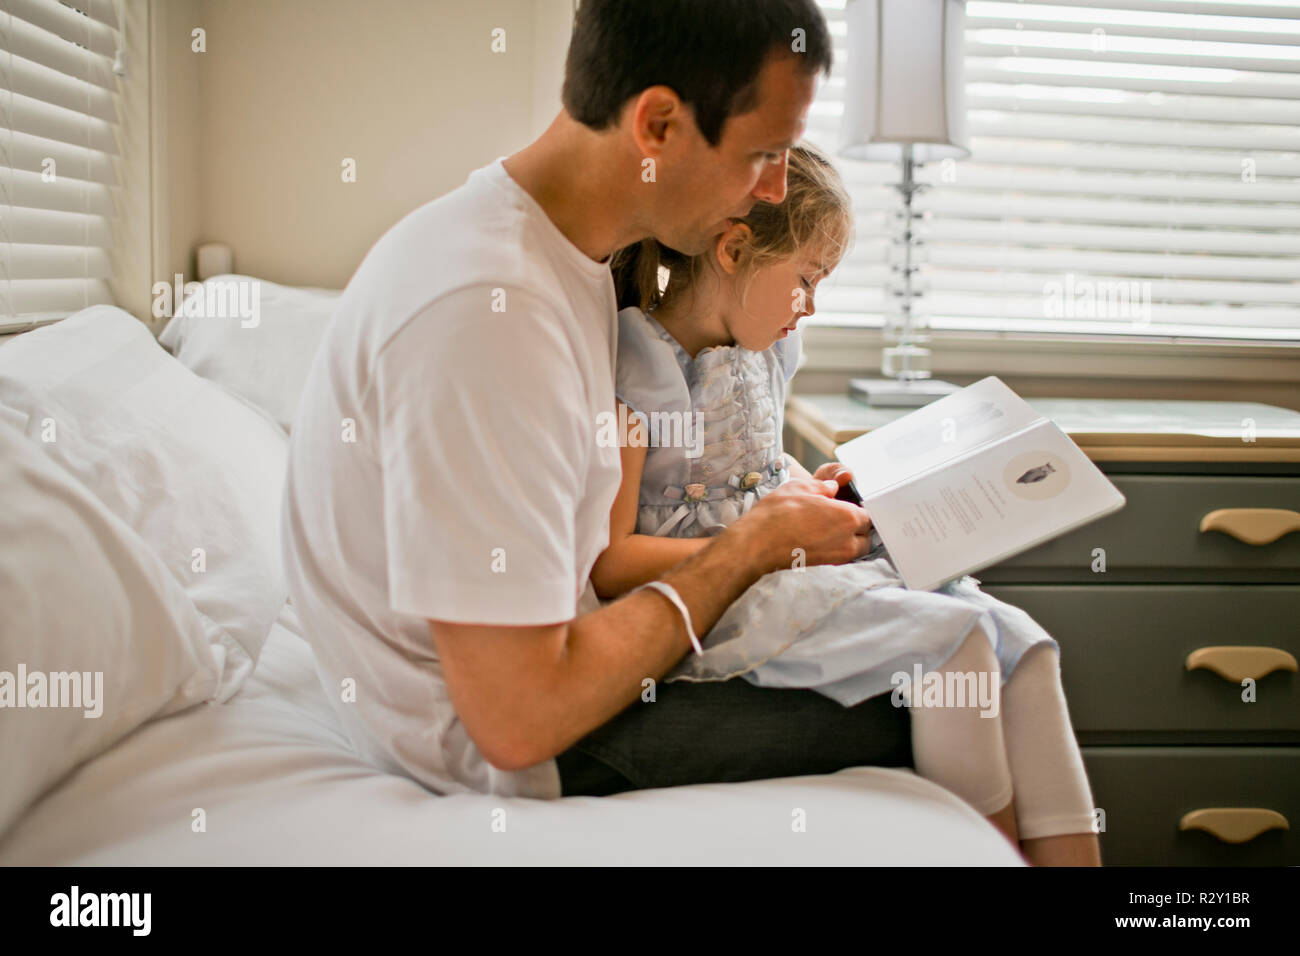 Father sitting on a bed reading a book with his daughter. Stock Photo